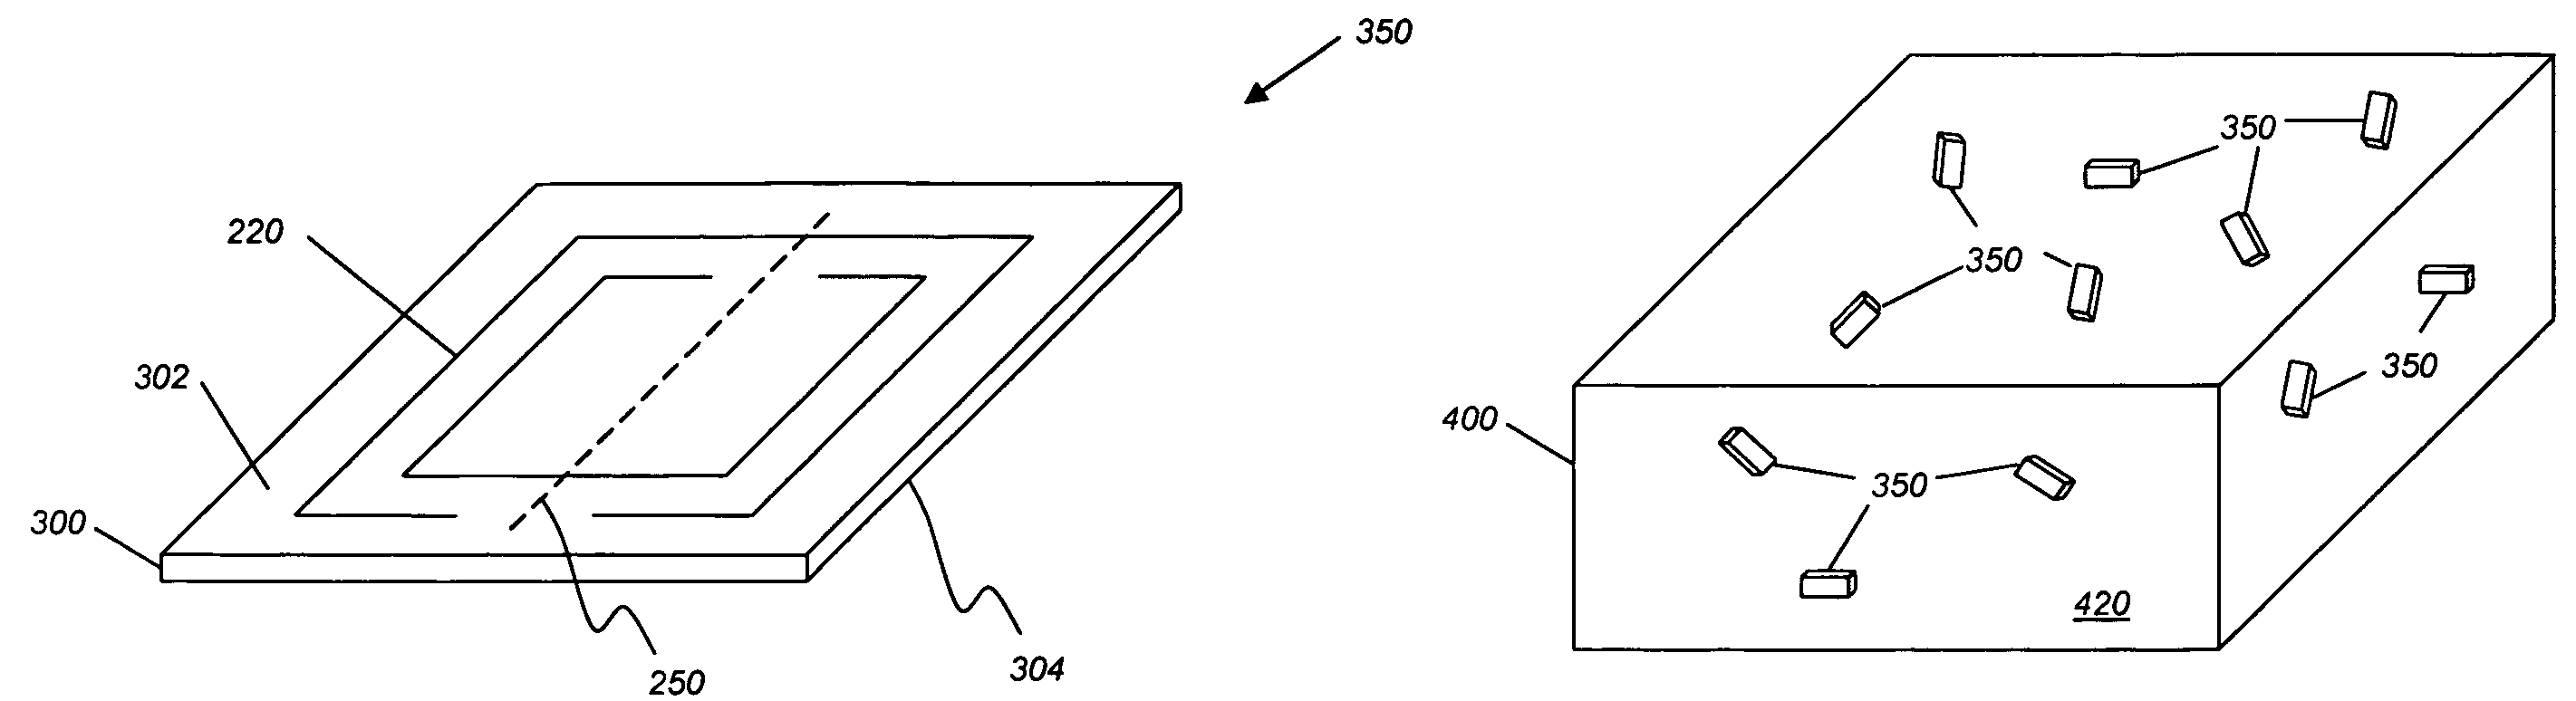 Random negative index material structures in a three-dimensional volume